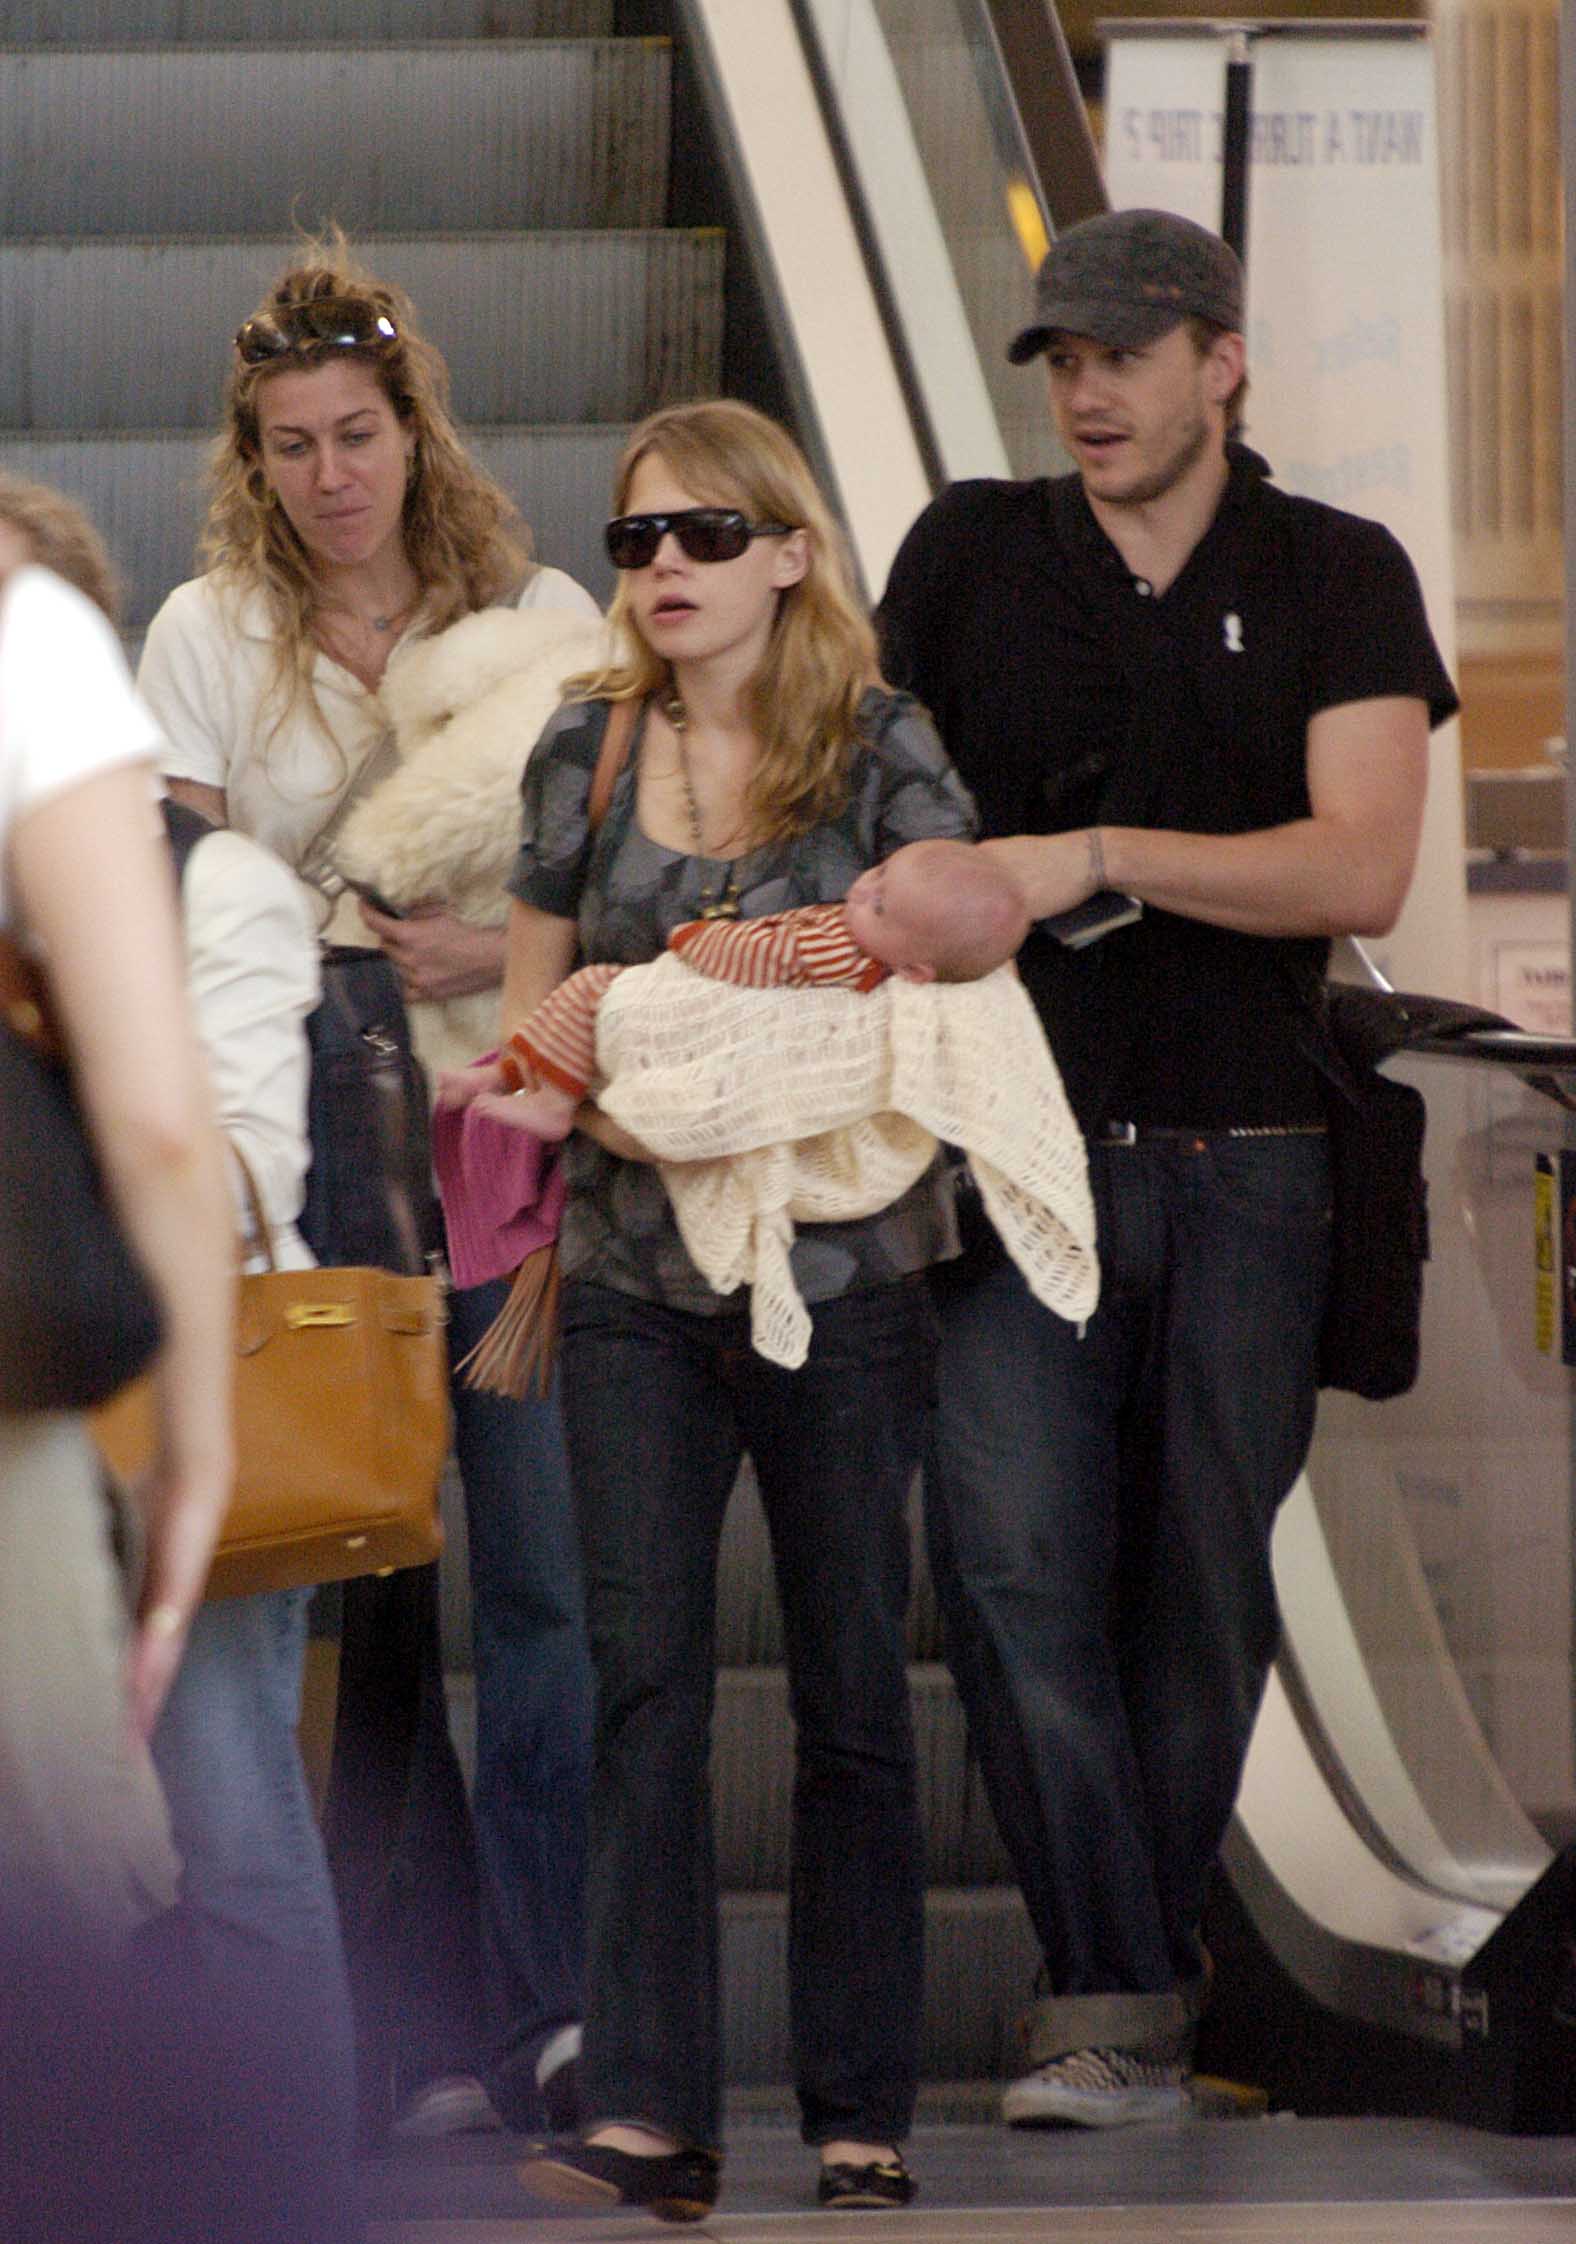 Heath Ledger, Michelle Williams and their daughter Matilda at the Sydney International Airport in 2006. | Source: Getty Images